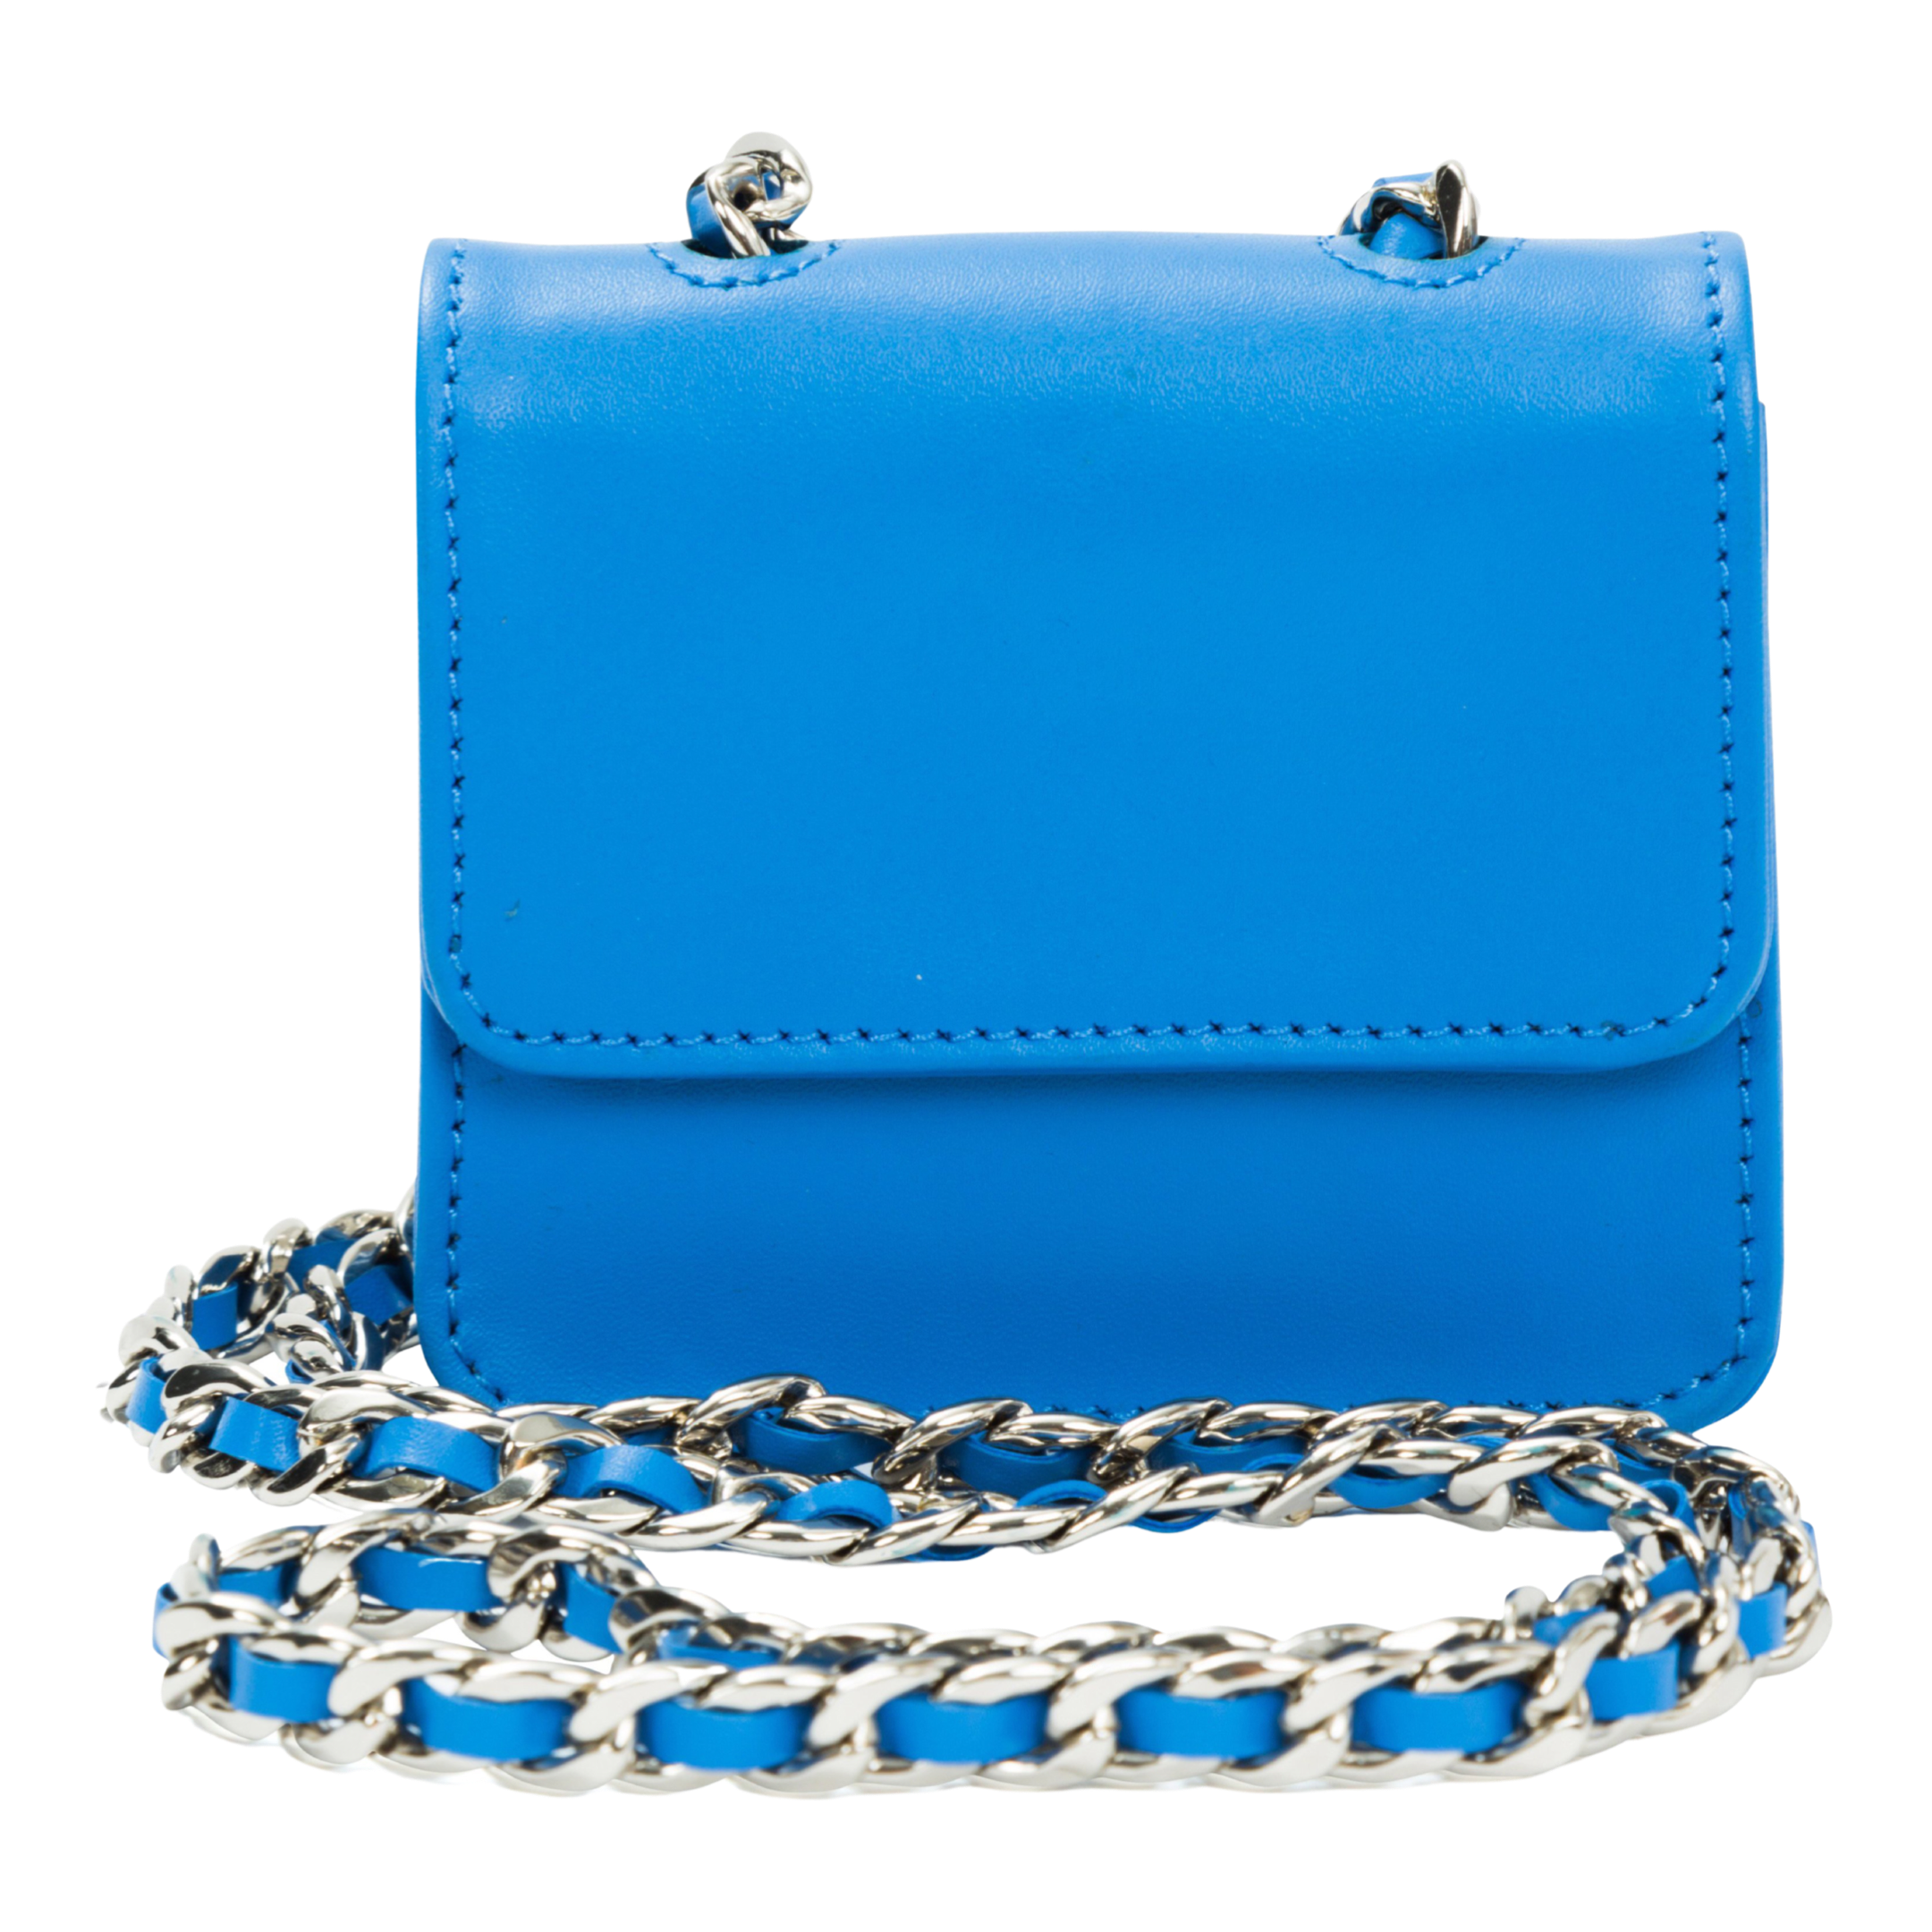 ITSY BITSY MICRO MINI BLUE LEATHER CHAIN BAG